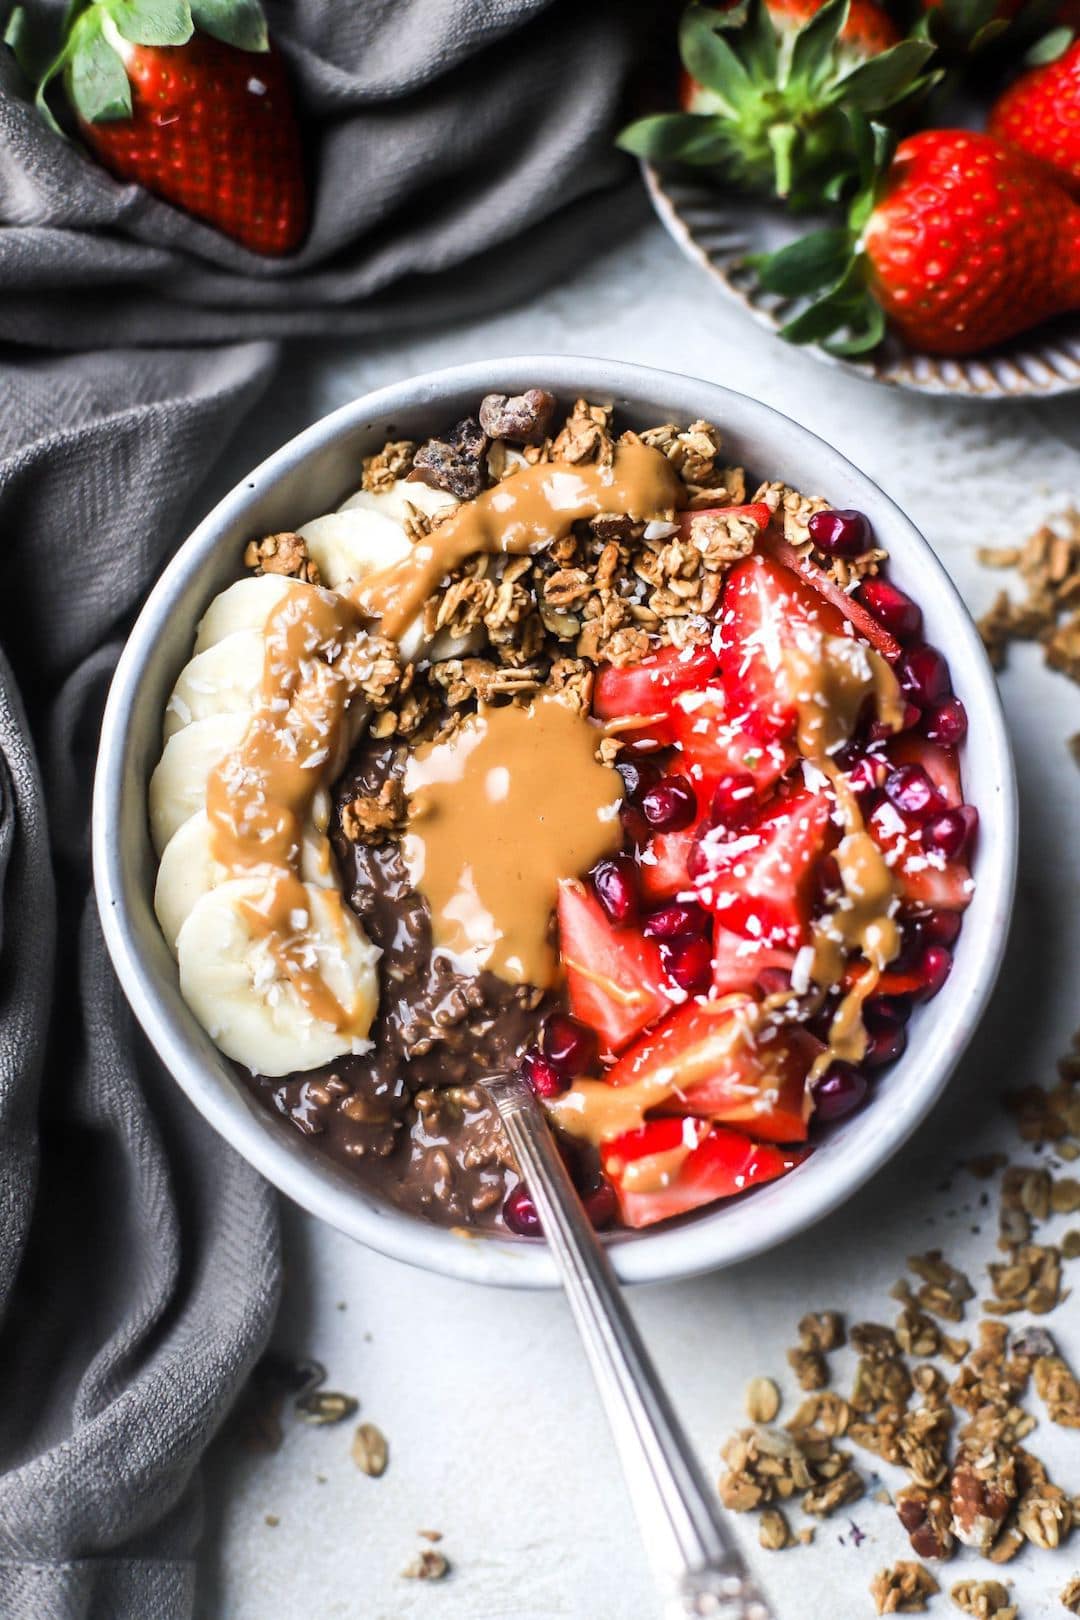 Big bowl of chocolate overnight oats topped with nut butter, banana, and berries